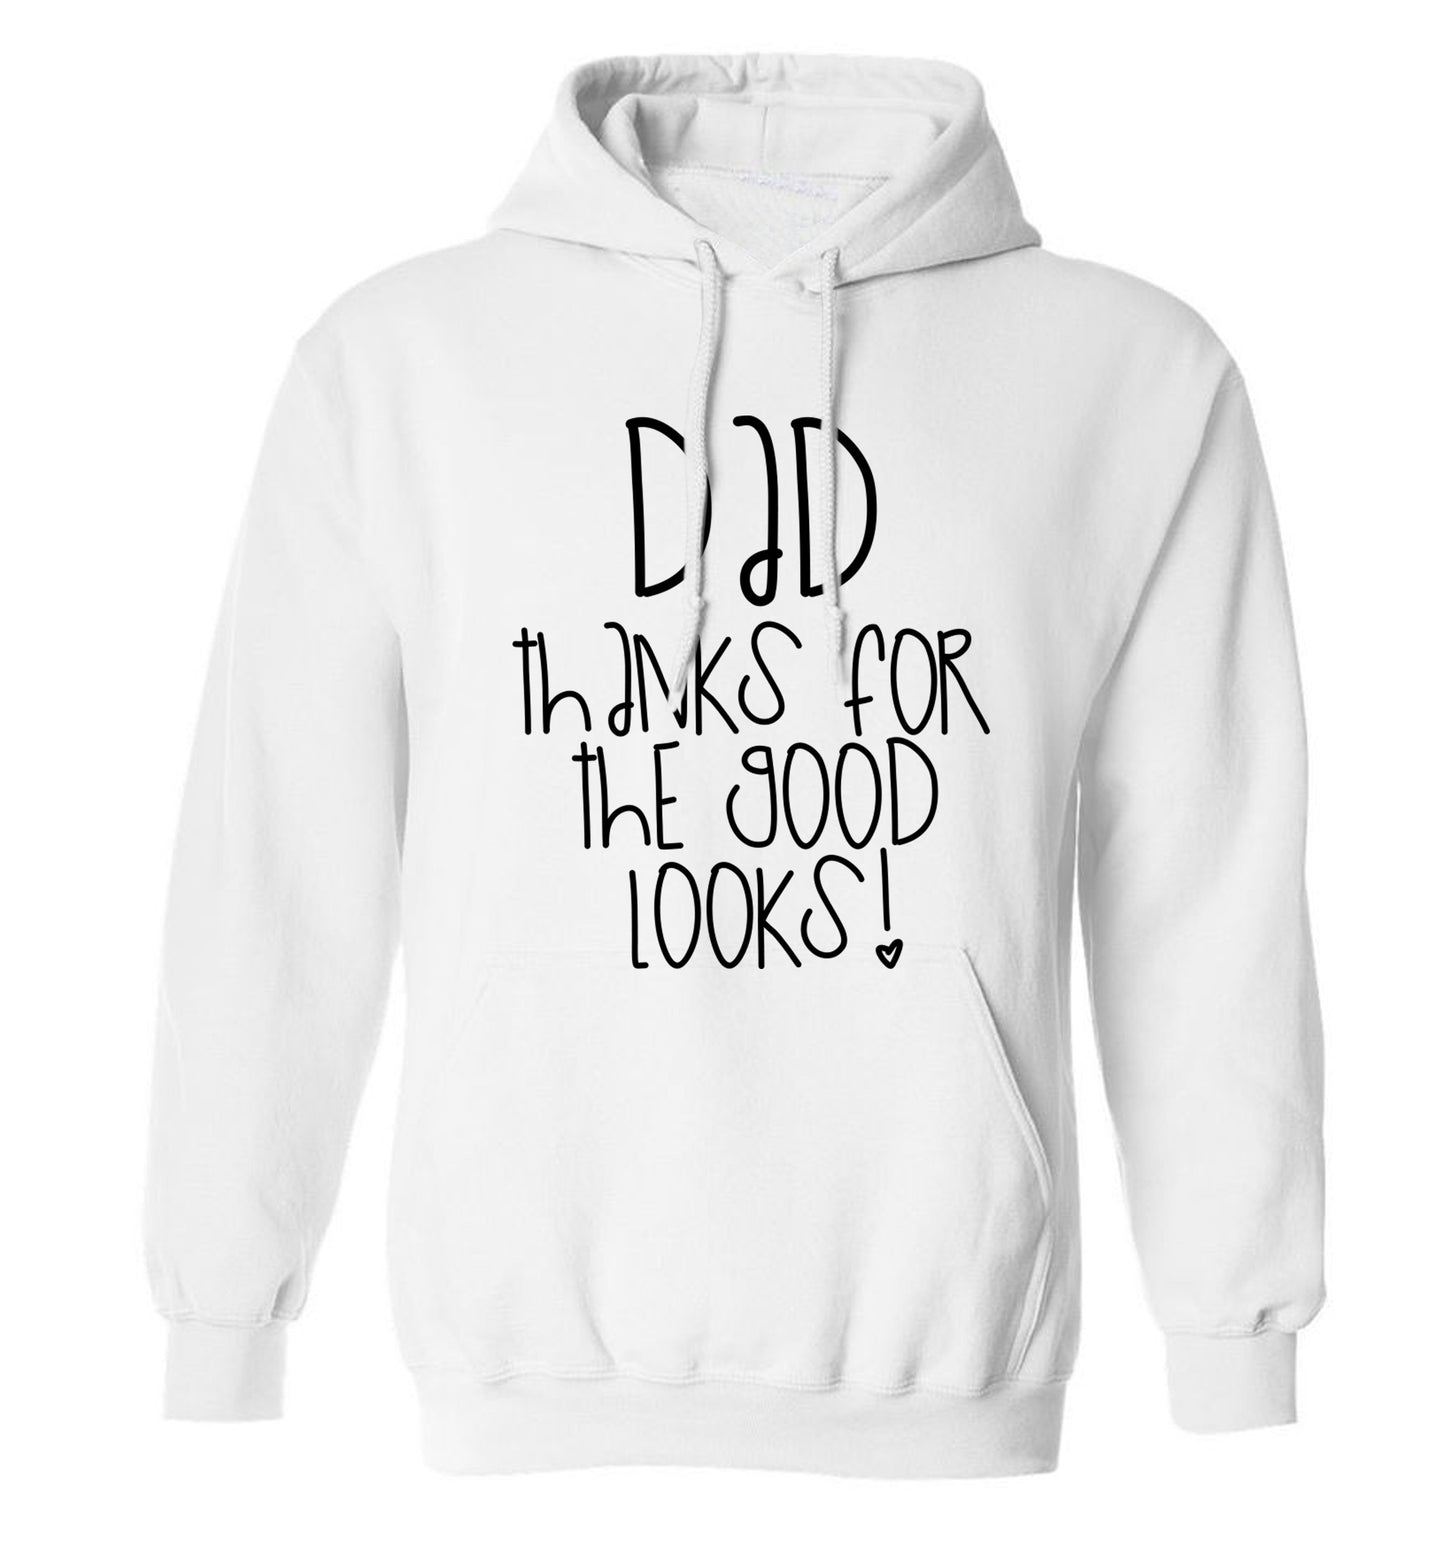 Dad thanks for the good looks adults unisex white hoodie 2XL